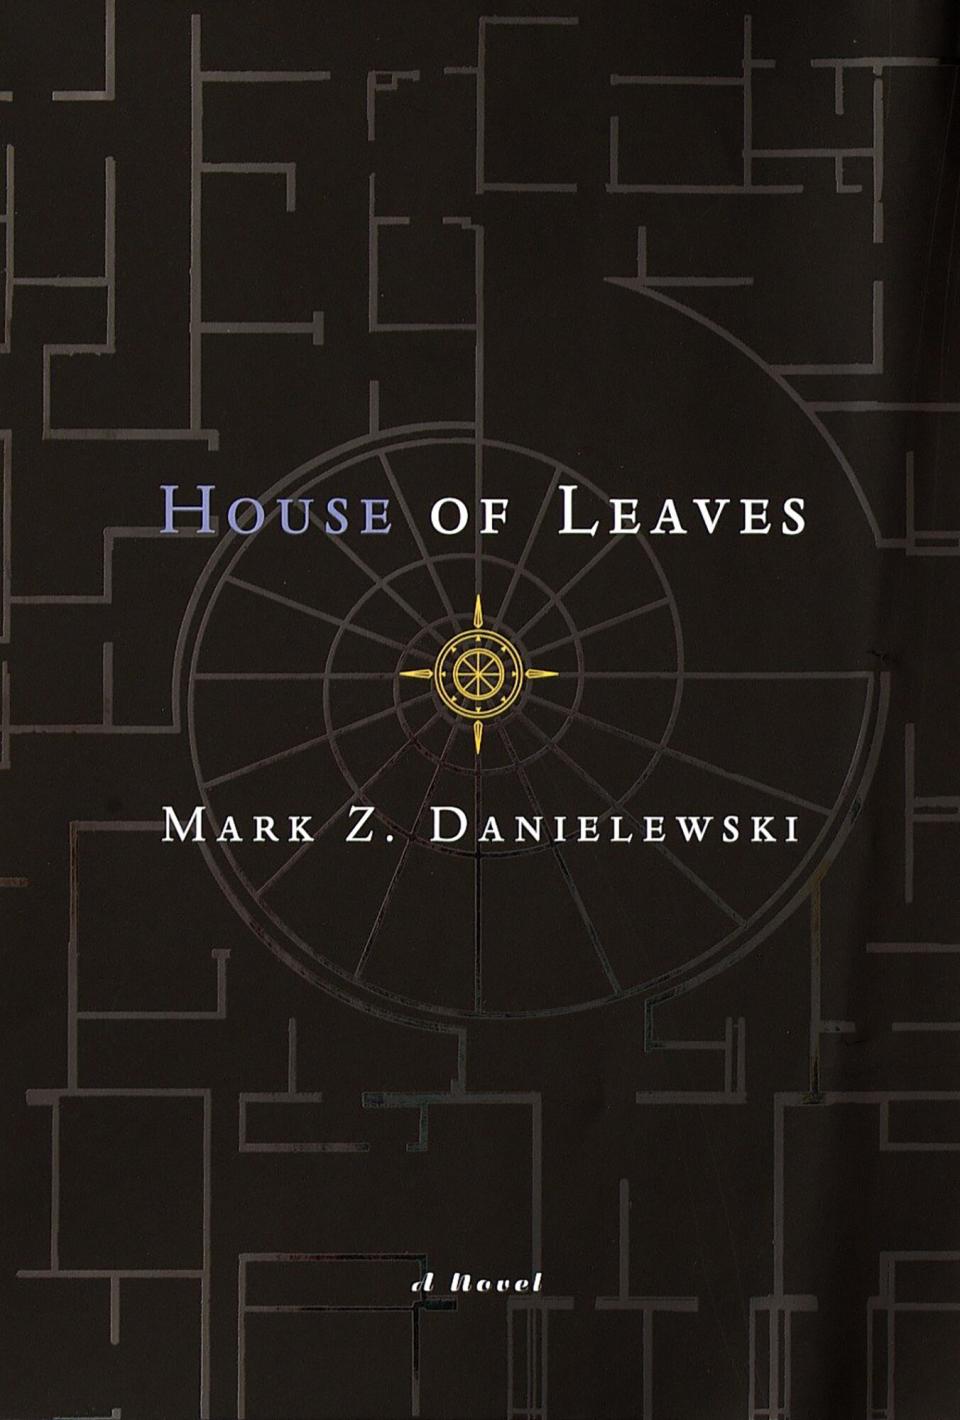 House of Leaves Hardcover – March 7, 2000 by Mark Z. Danielewski